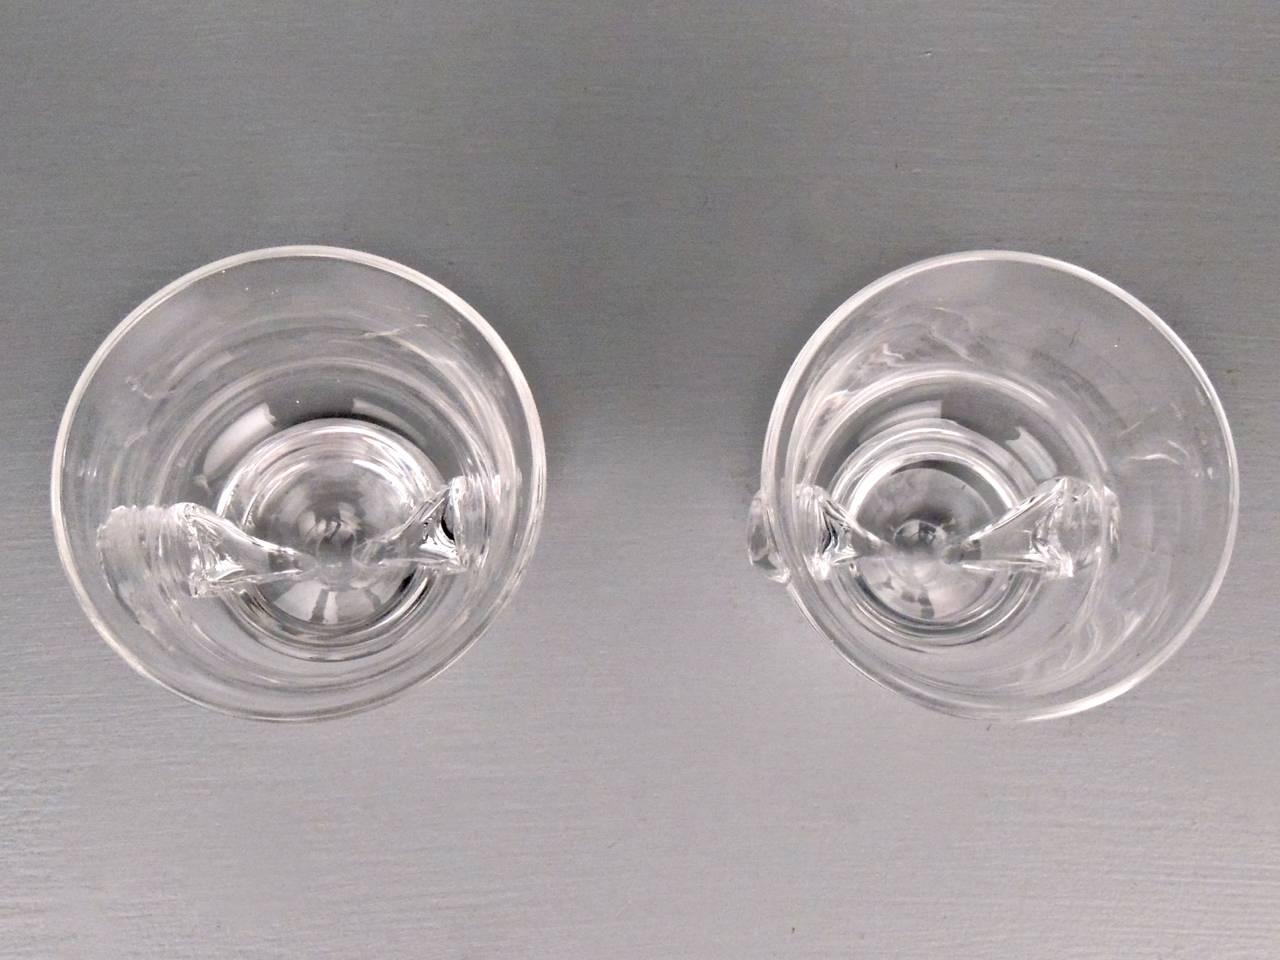 American Pair of Mid-Century Modern Steuben Glass Scroll Handle Vases by George Thompson